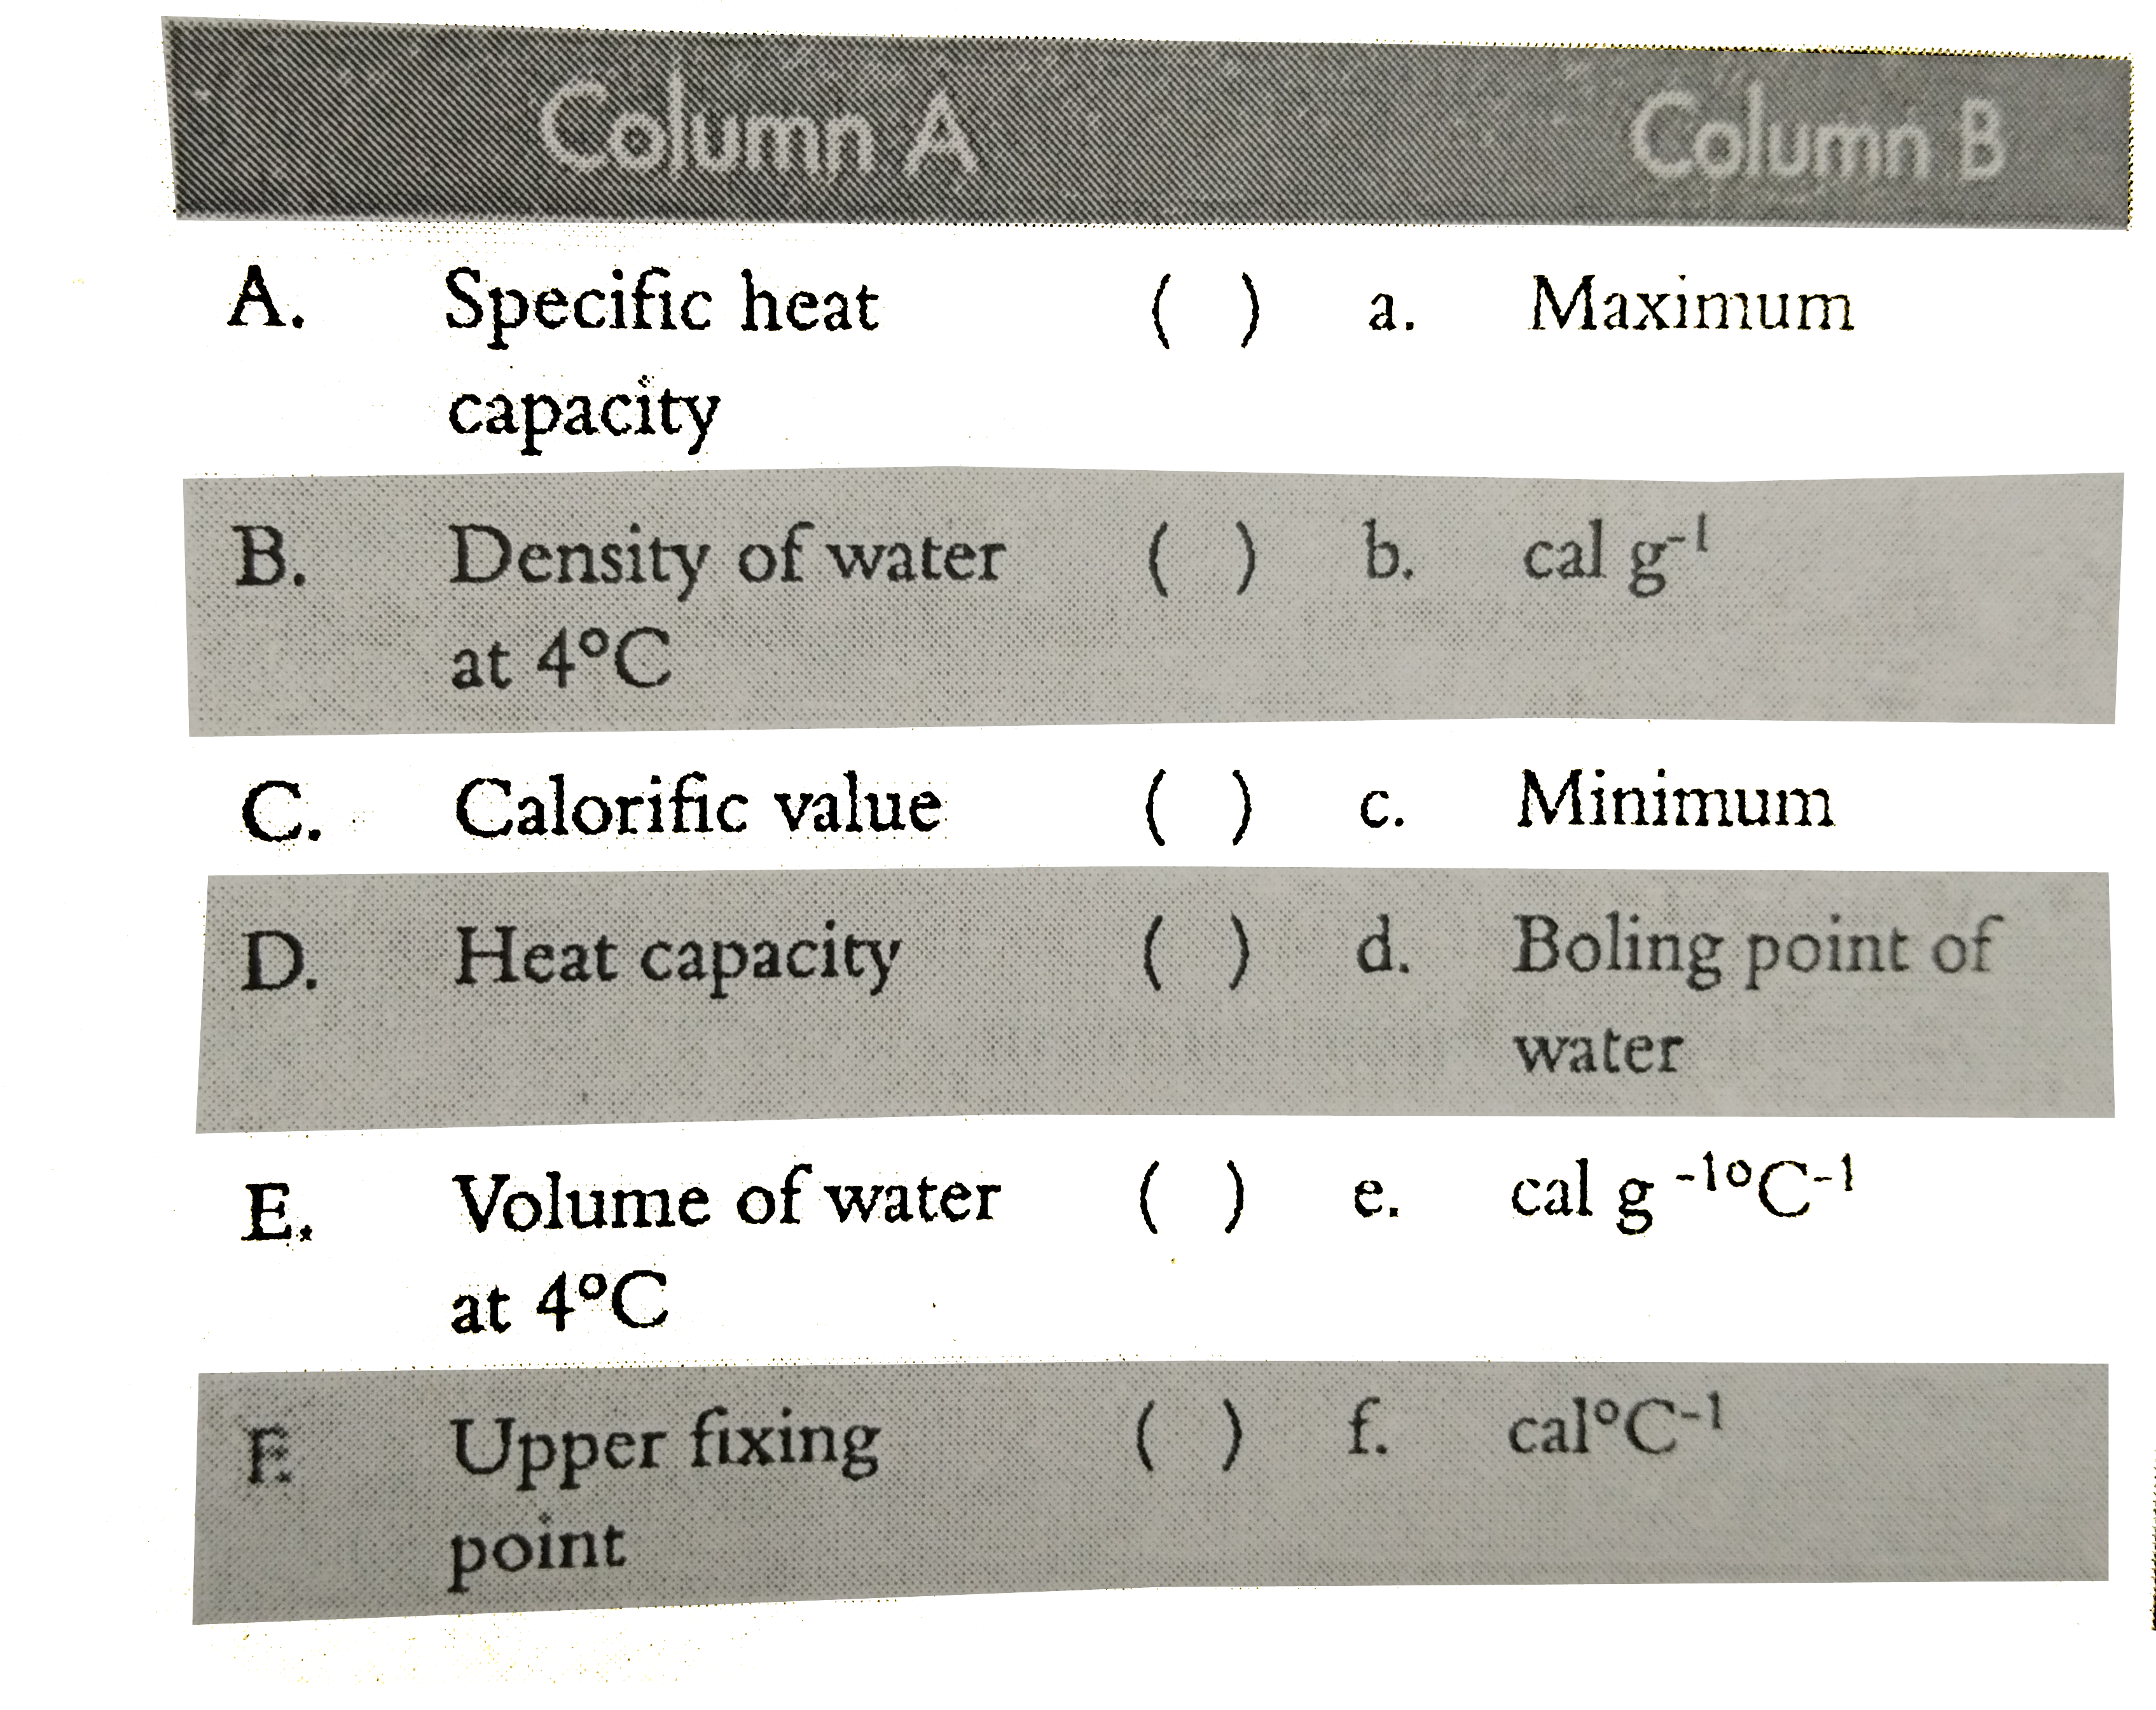 Match the entries given in column A with the appropriate ones in colum B.